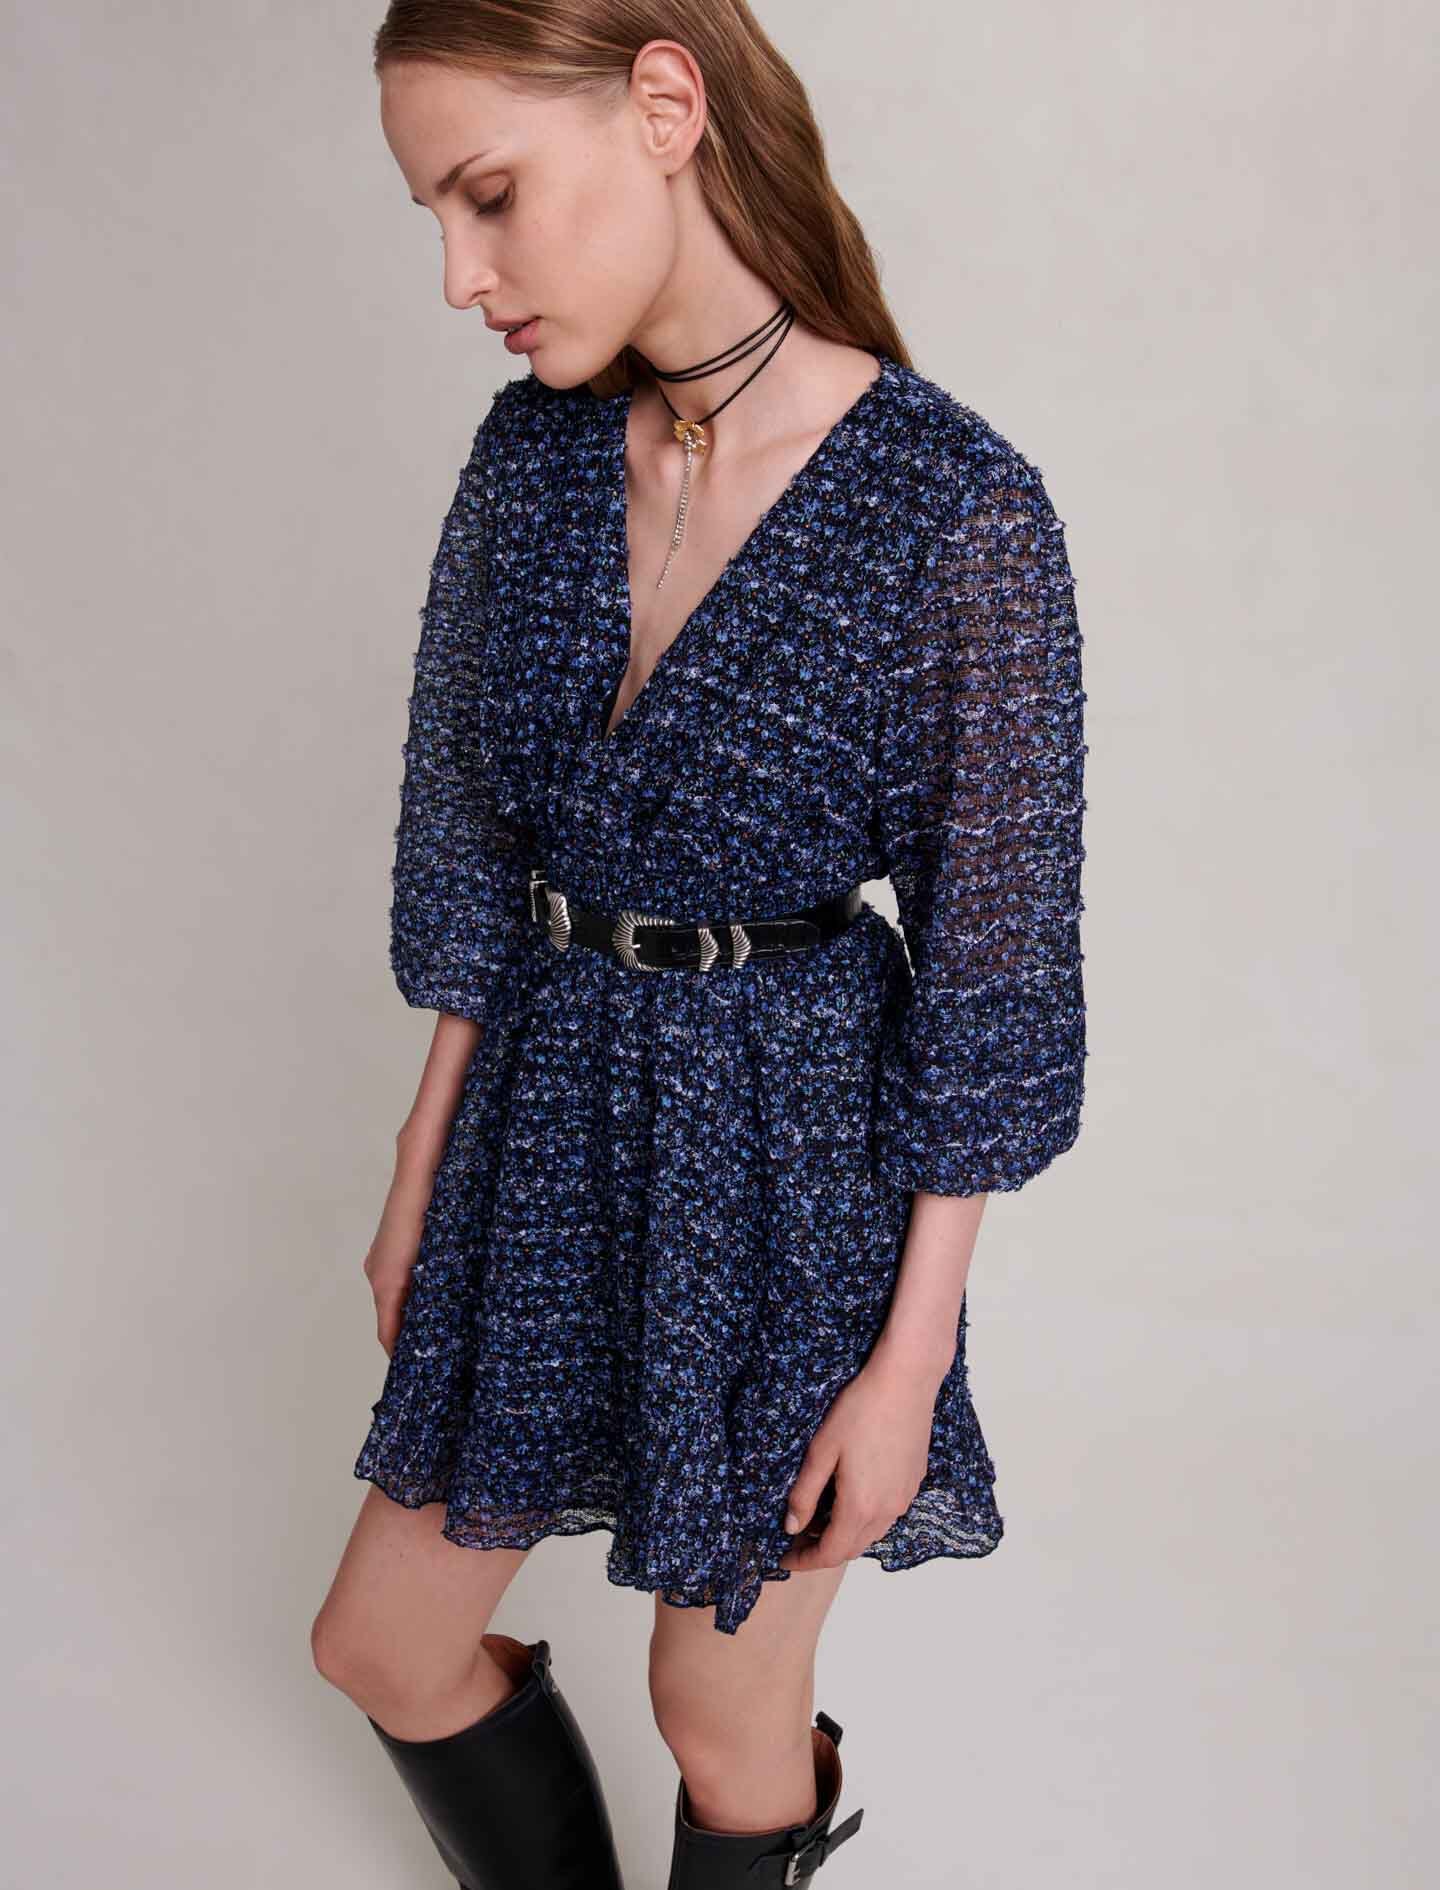 Blue-sparkling dress with ruffles